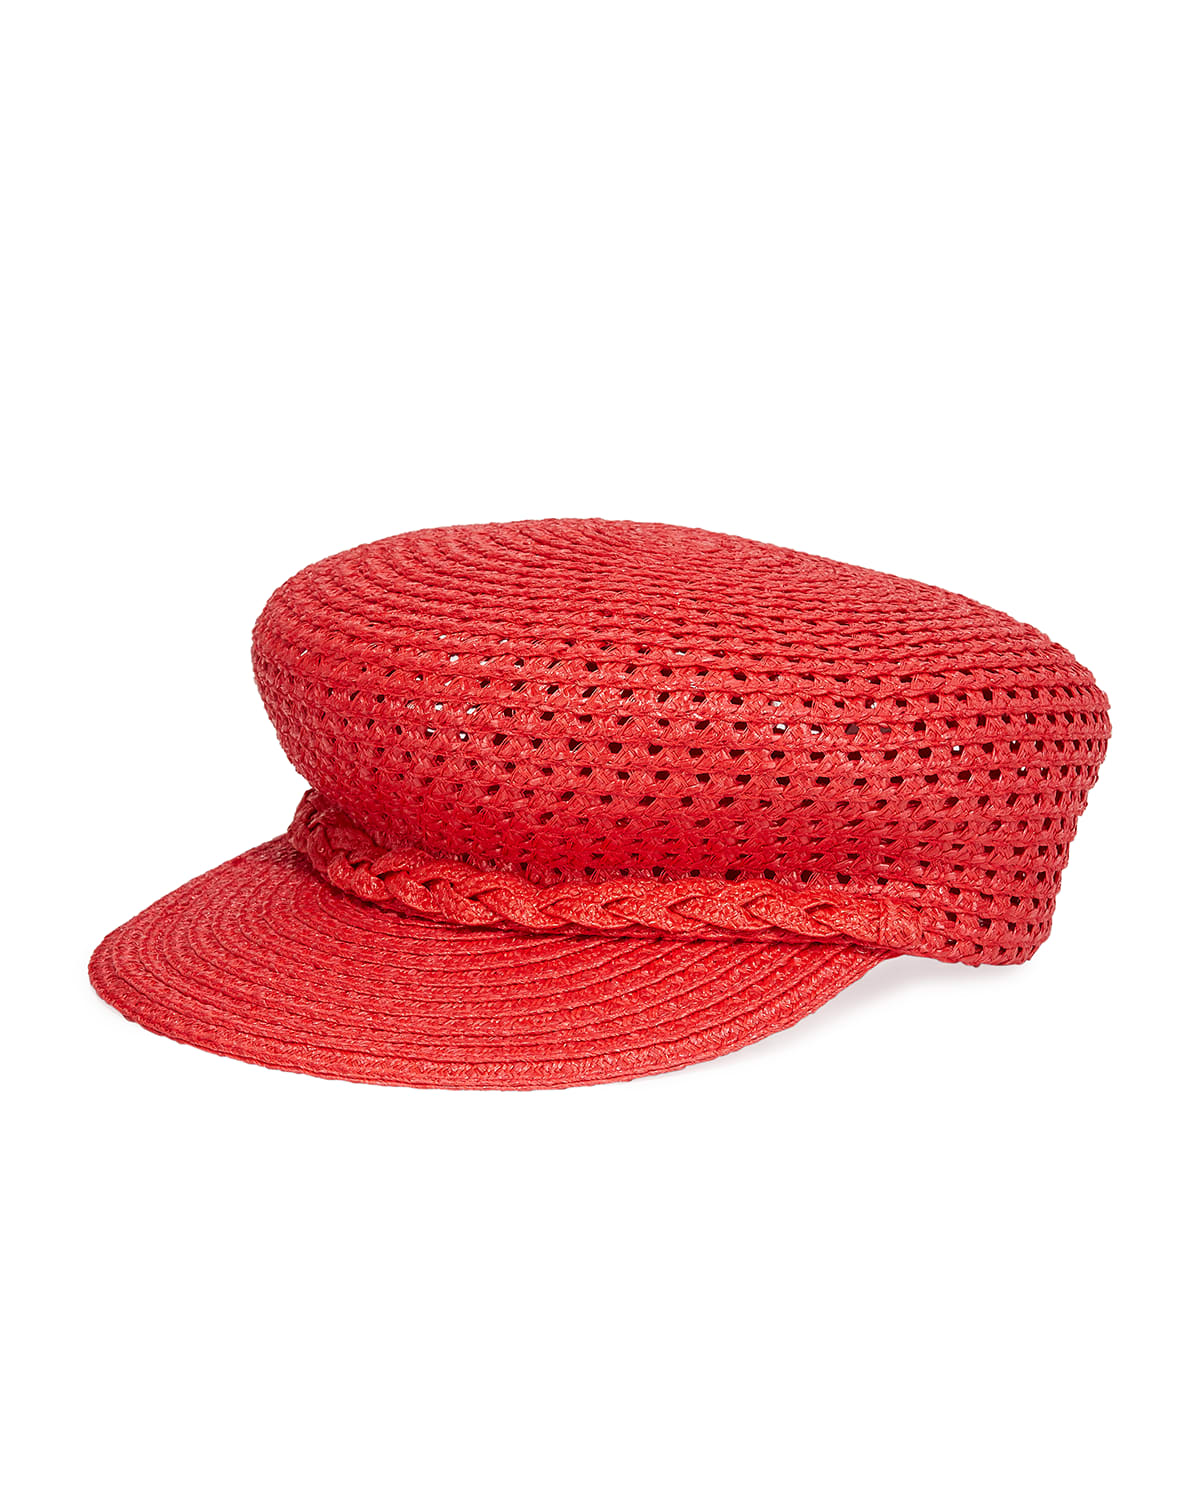 Eric Javits Capitan Woven Squishee Newsboy Hat In Red